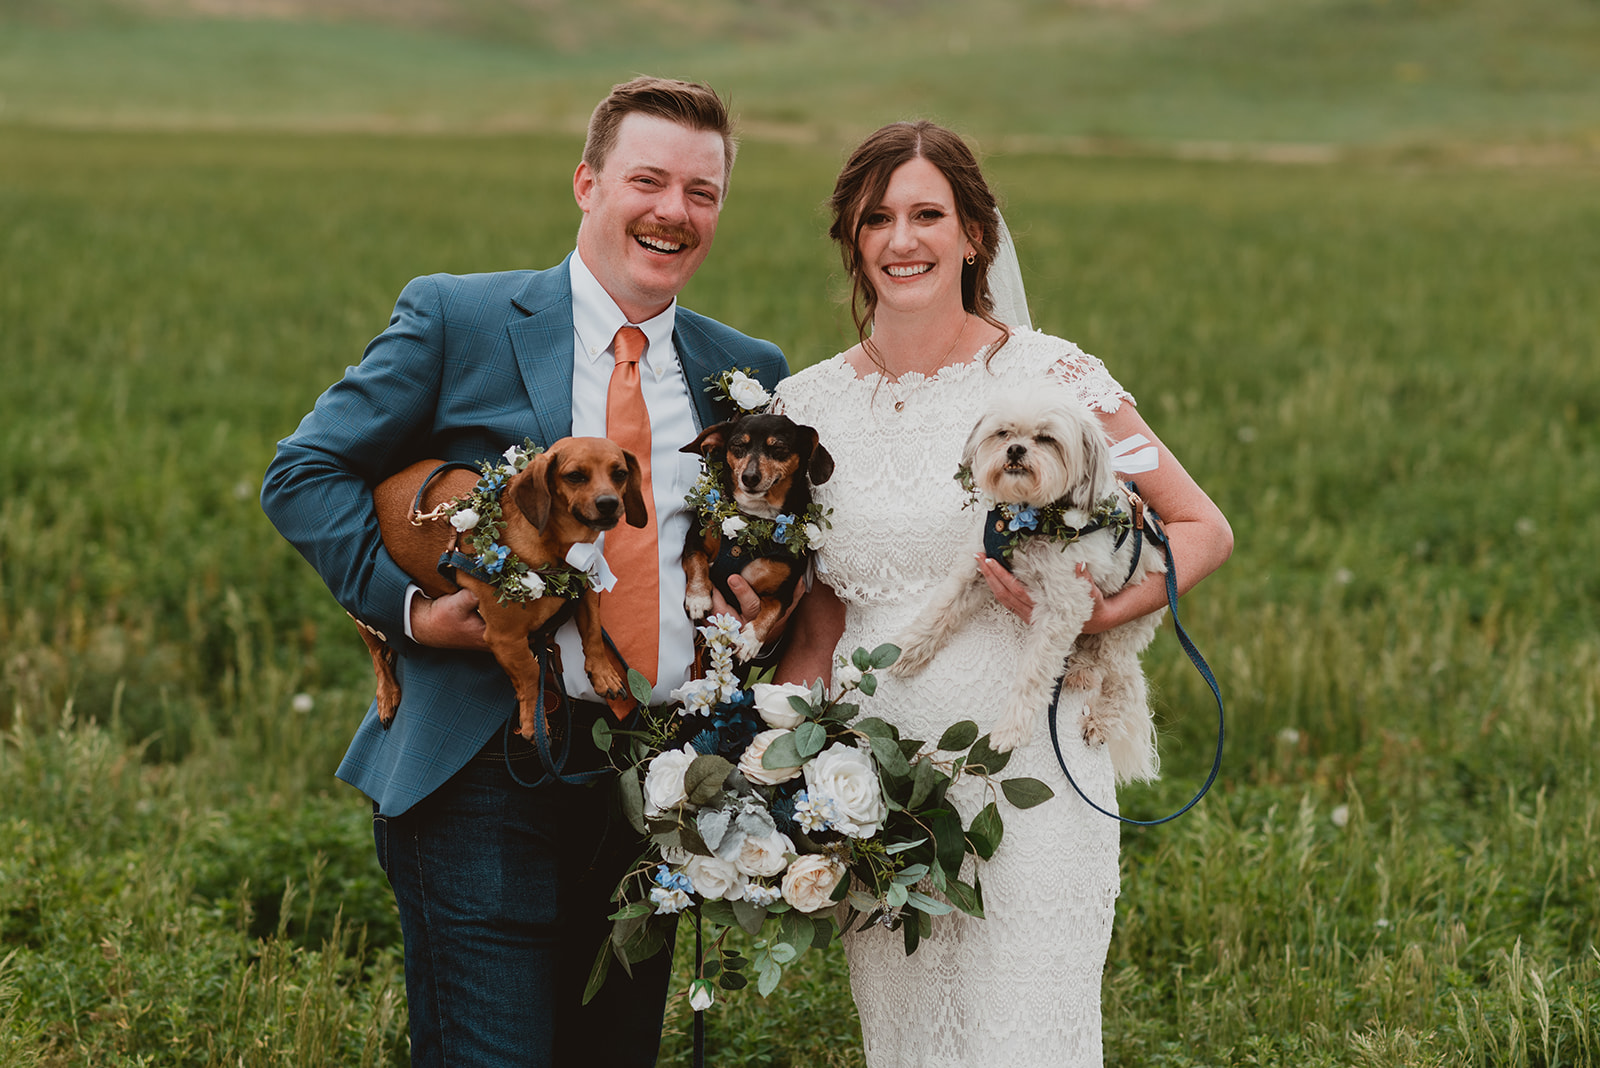 Couple posed with their 3 dogs in their wedding attire at their wedding in Steamboat Springs, CO 